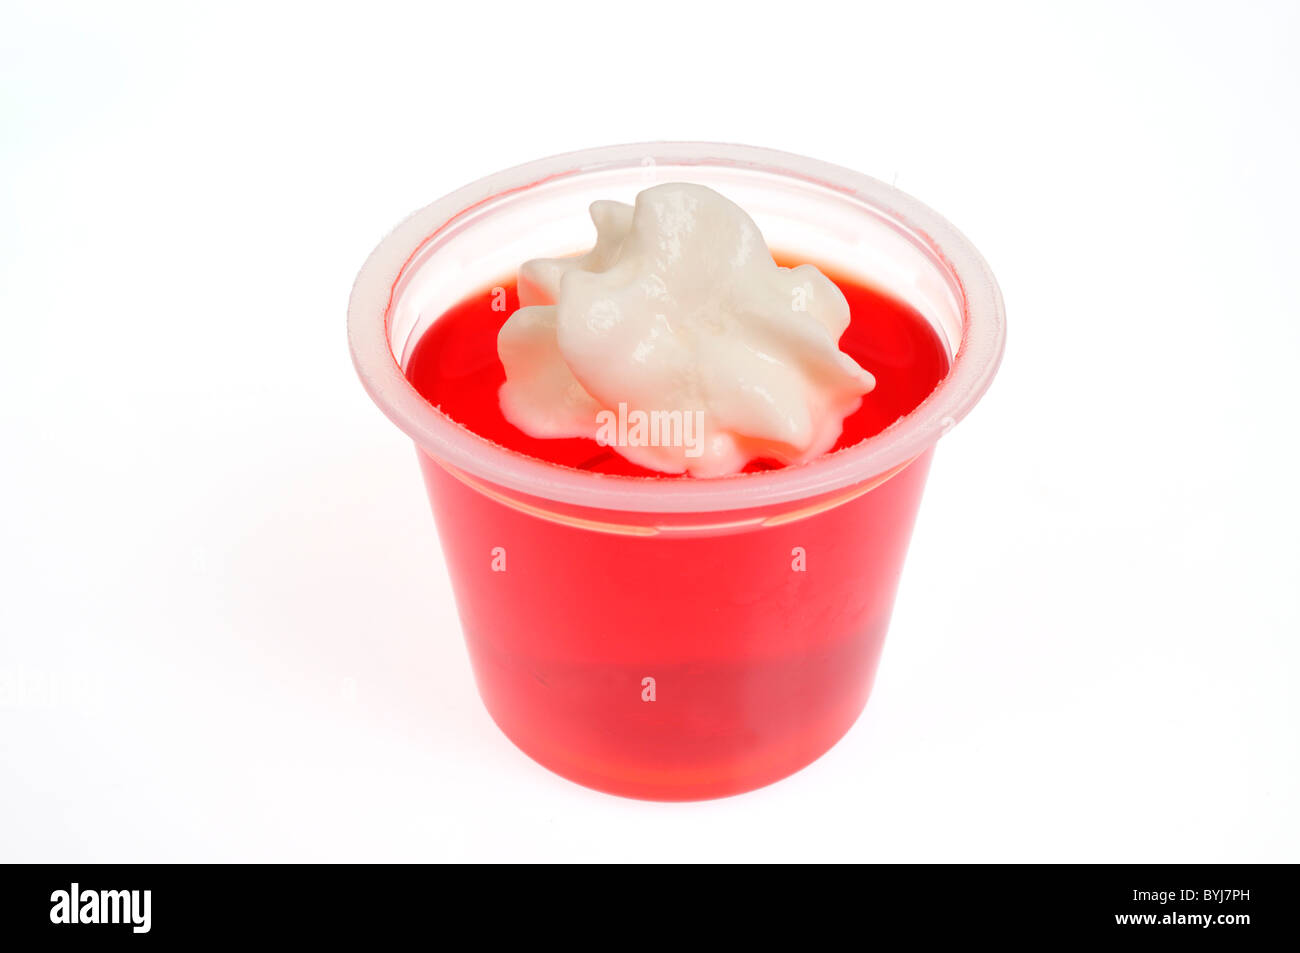 Jell-o pot with whipped cream topping on white background, cutout. Stock Photo